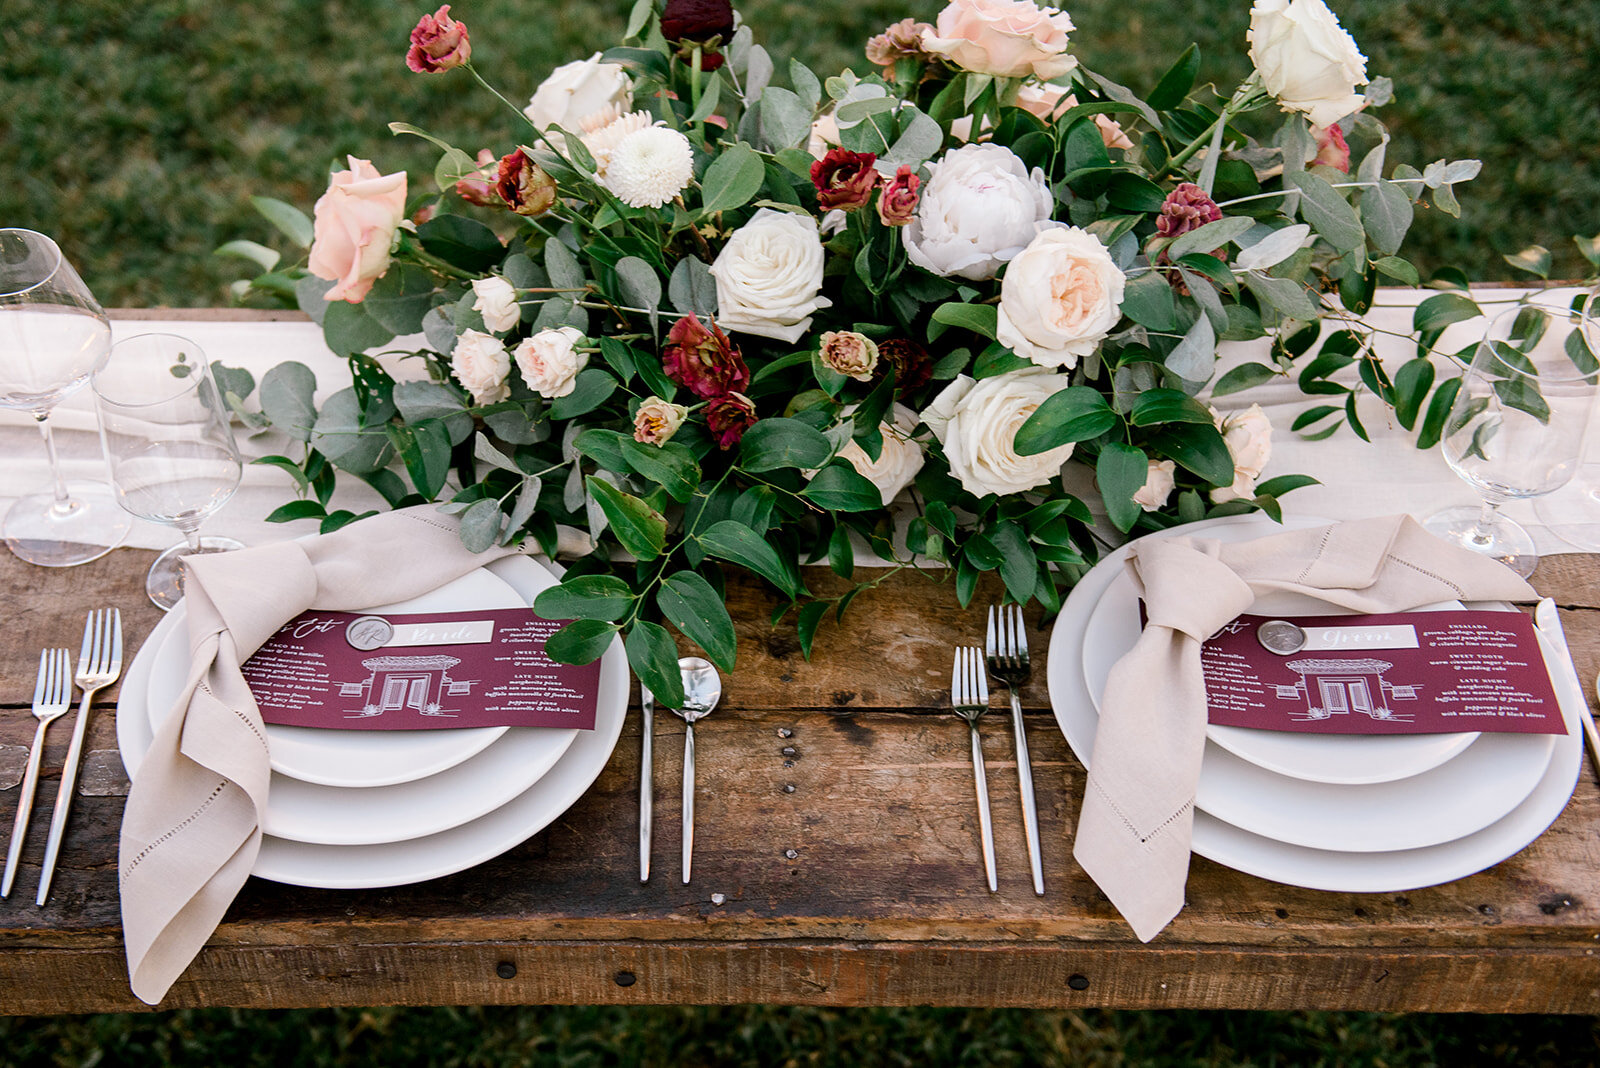 Farm To Table Catering Wedding Caterer Nevada City Grass